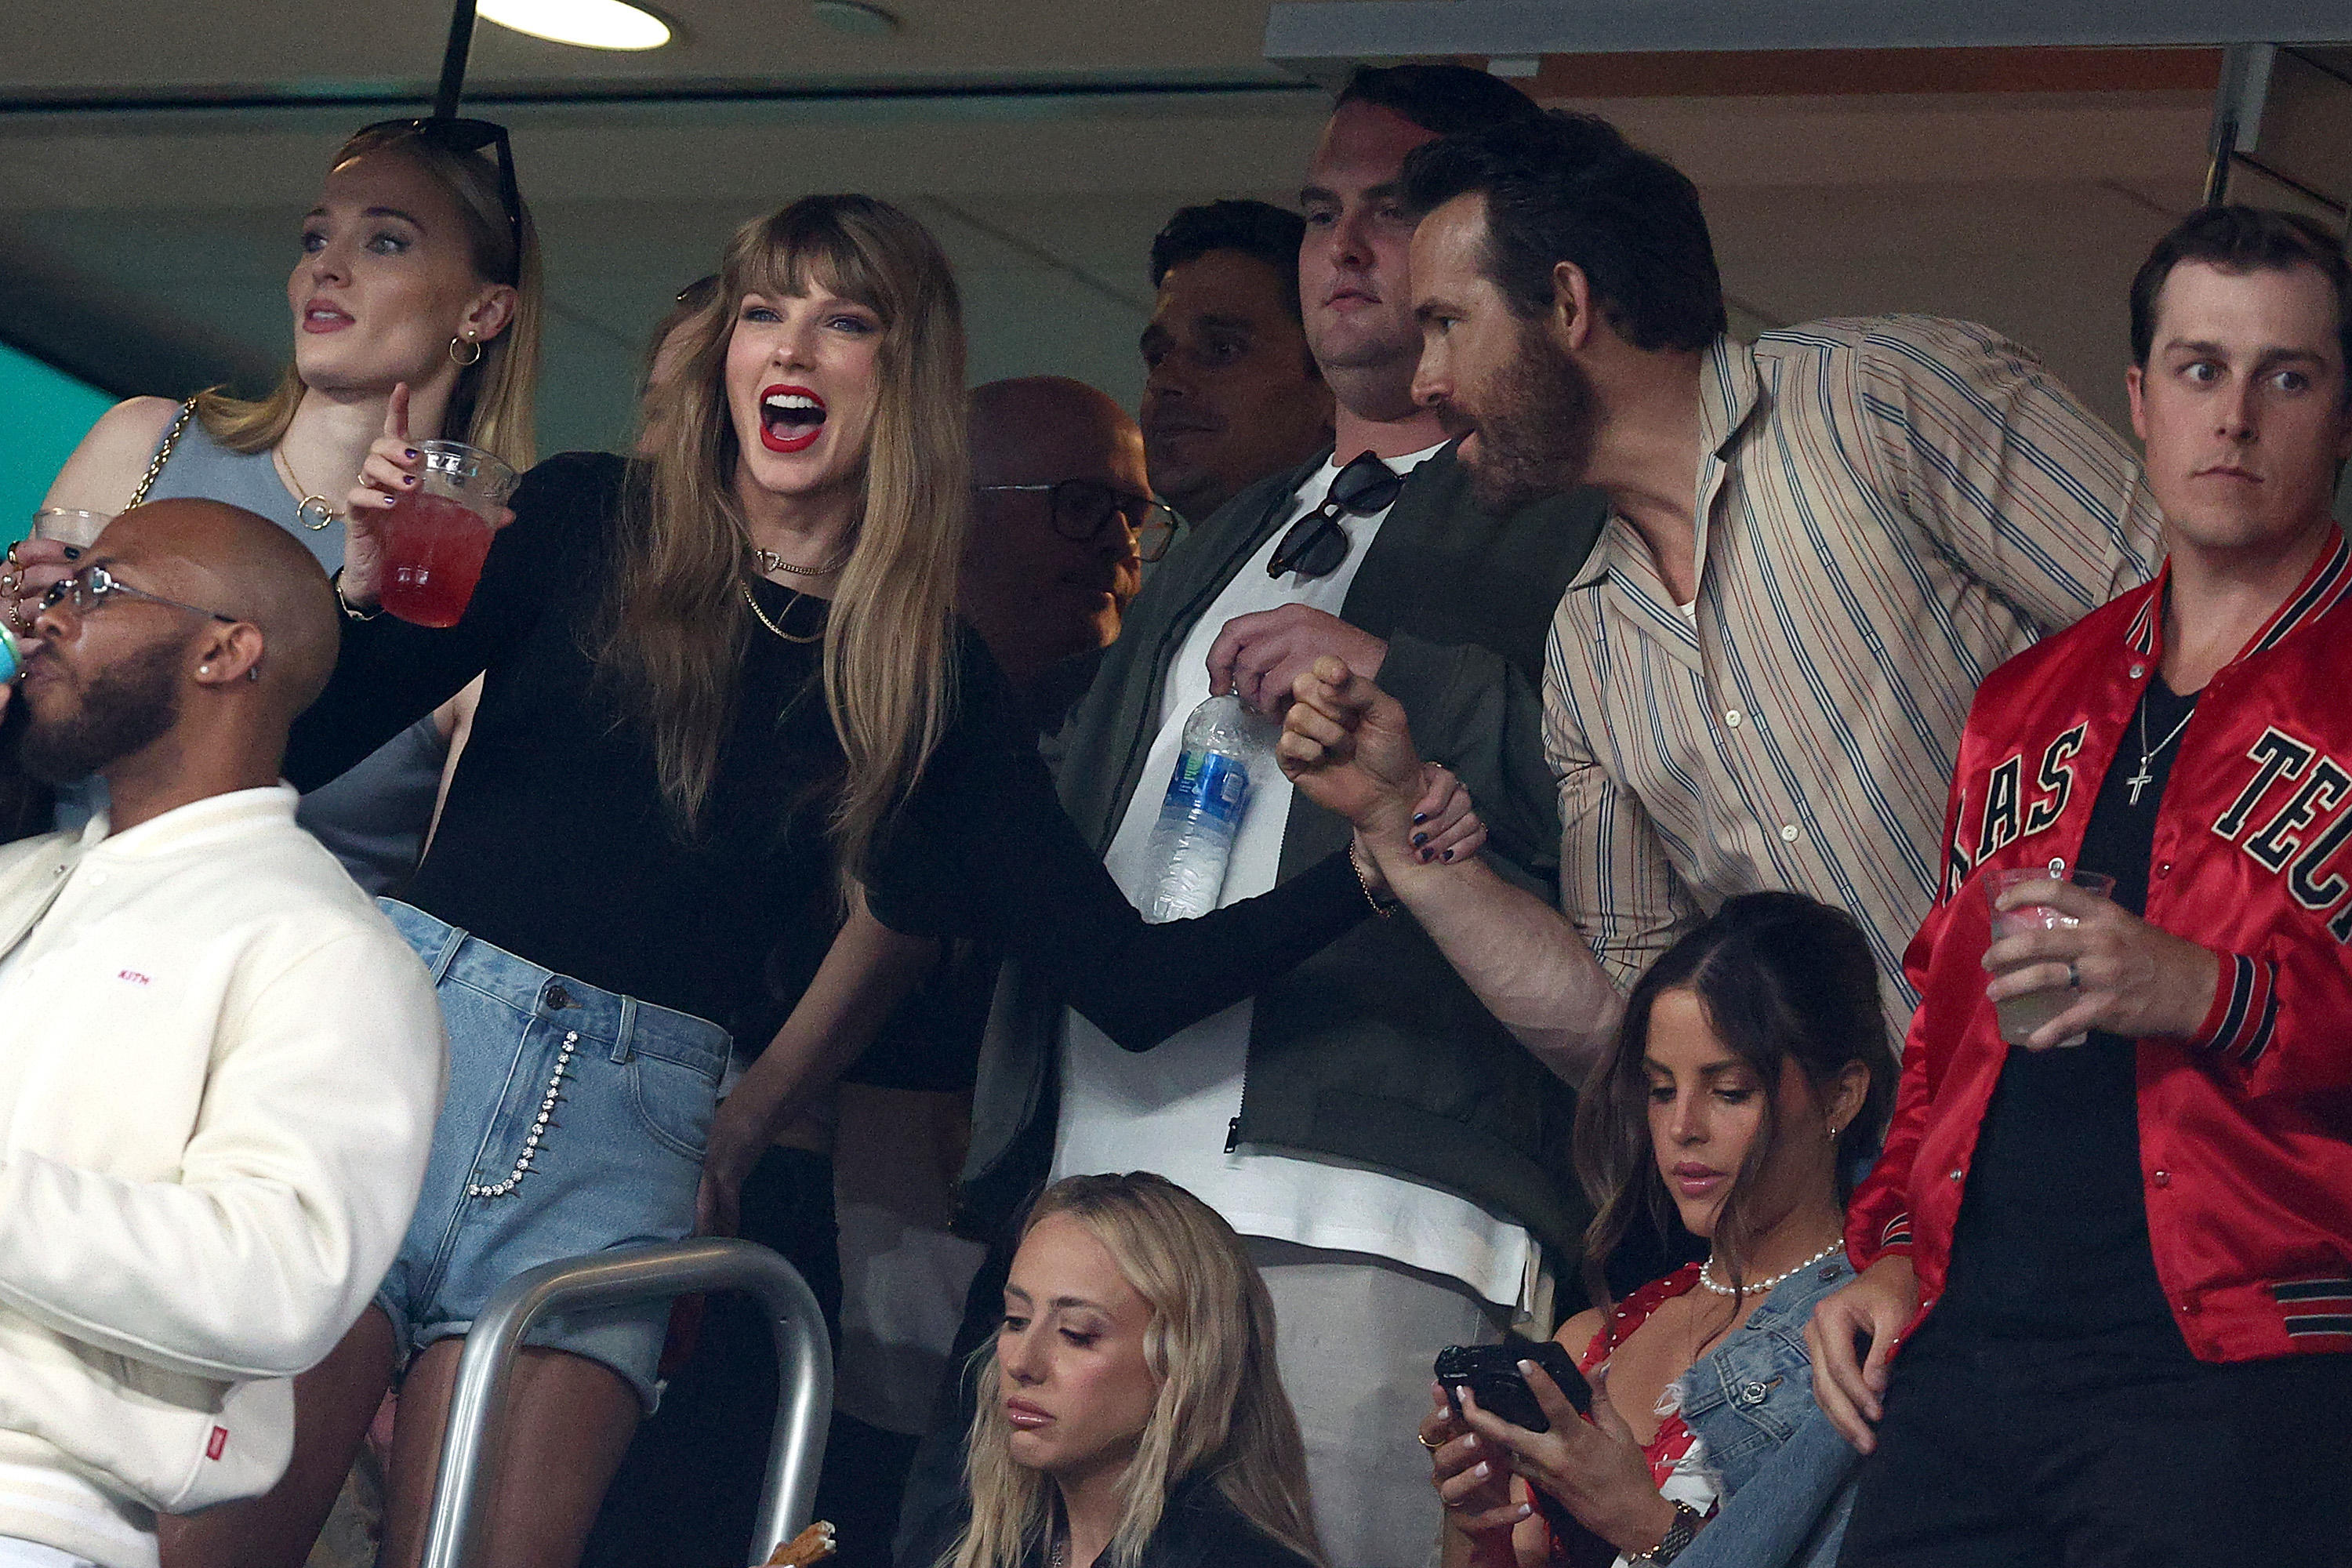 taylor cheering at the game with her friends around